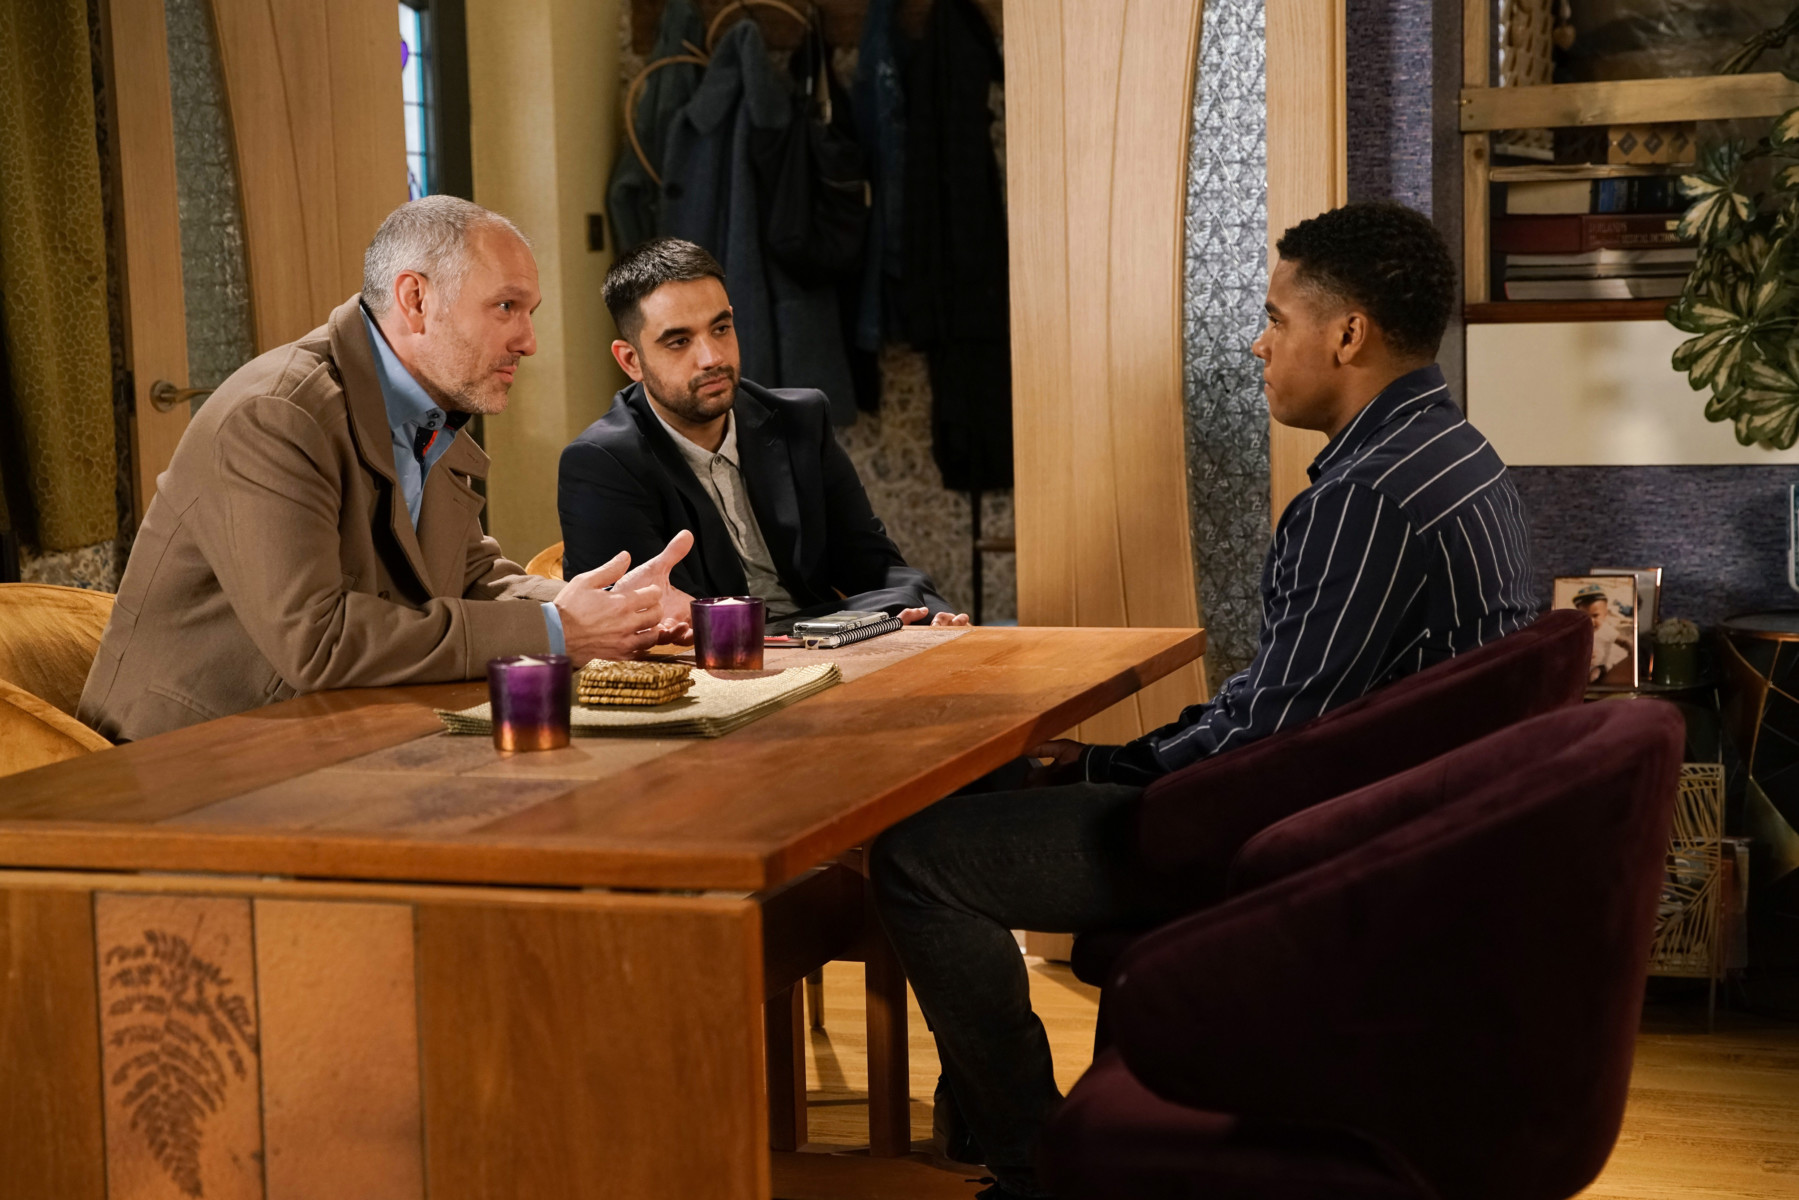 The County Manager and Press Officer call on James to discuss his options in Coronation Street